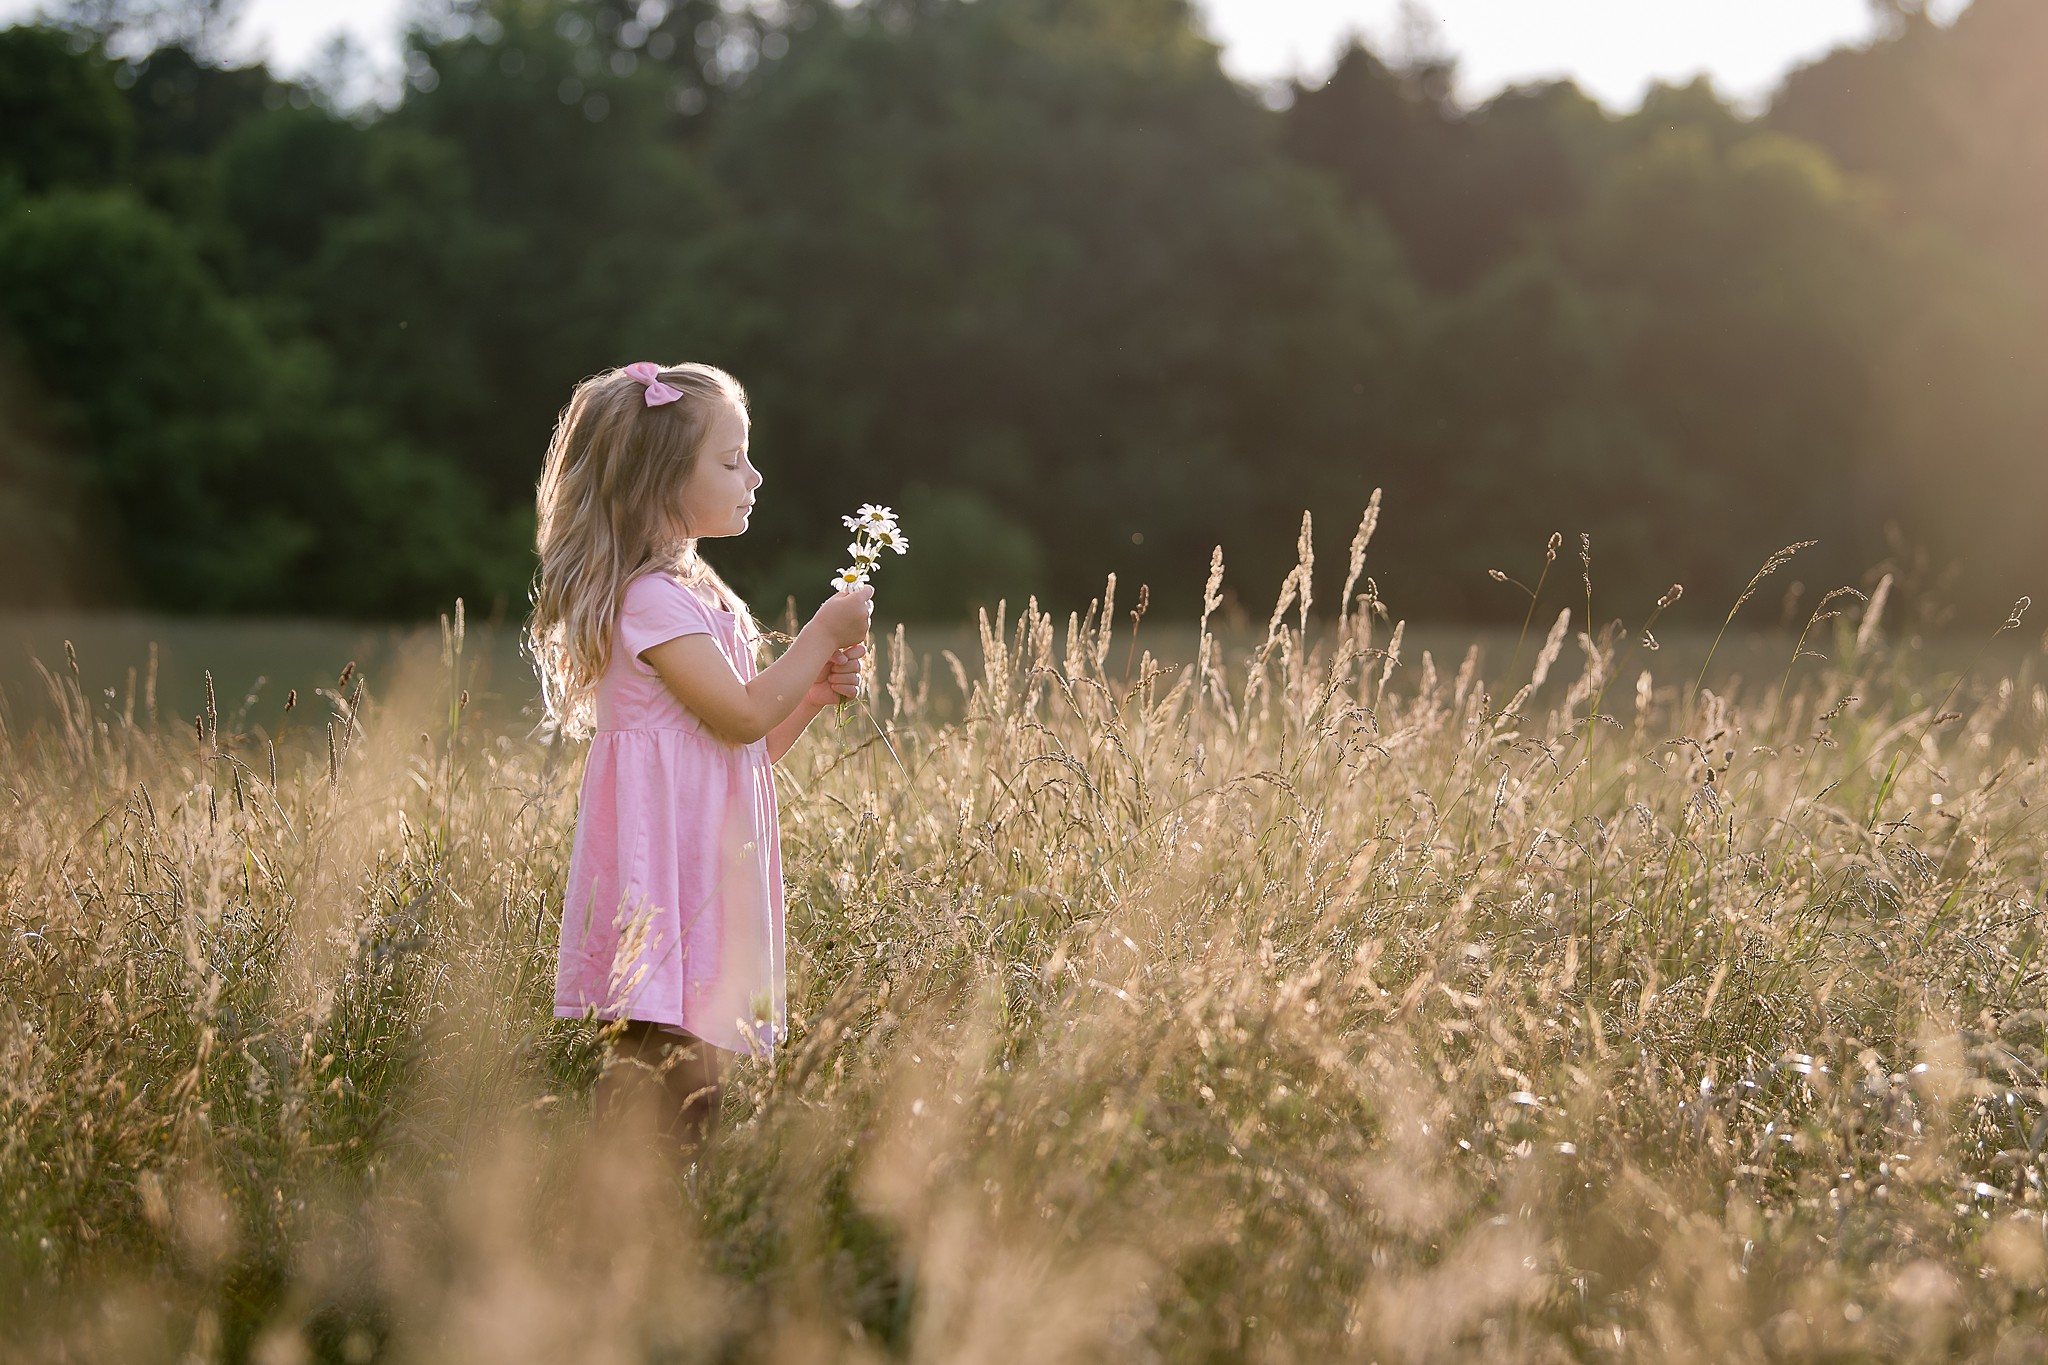 A young girl in a pink dress joyfully holds a delicate flower in her hand as she stands in a wheat field, while the photographer captures this beautiful moment from the side.